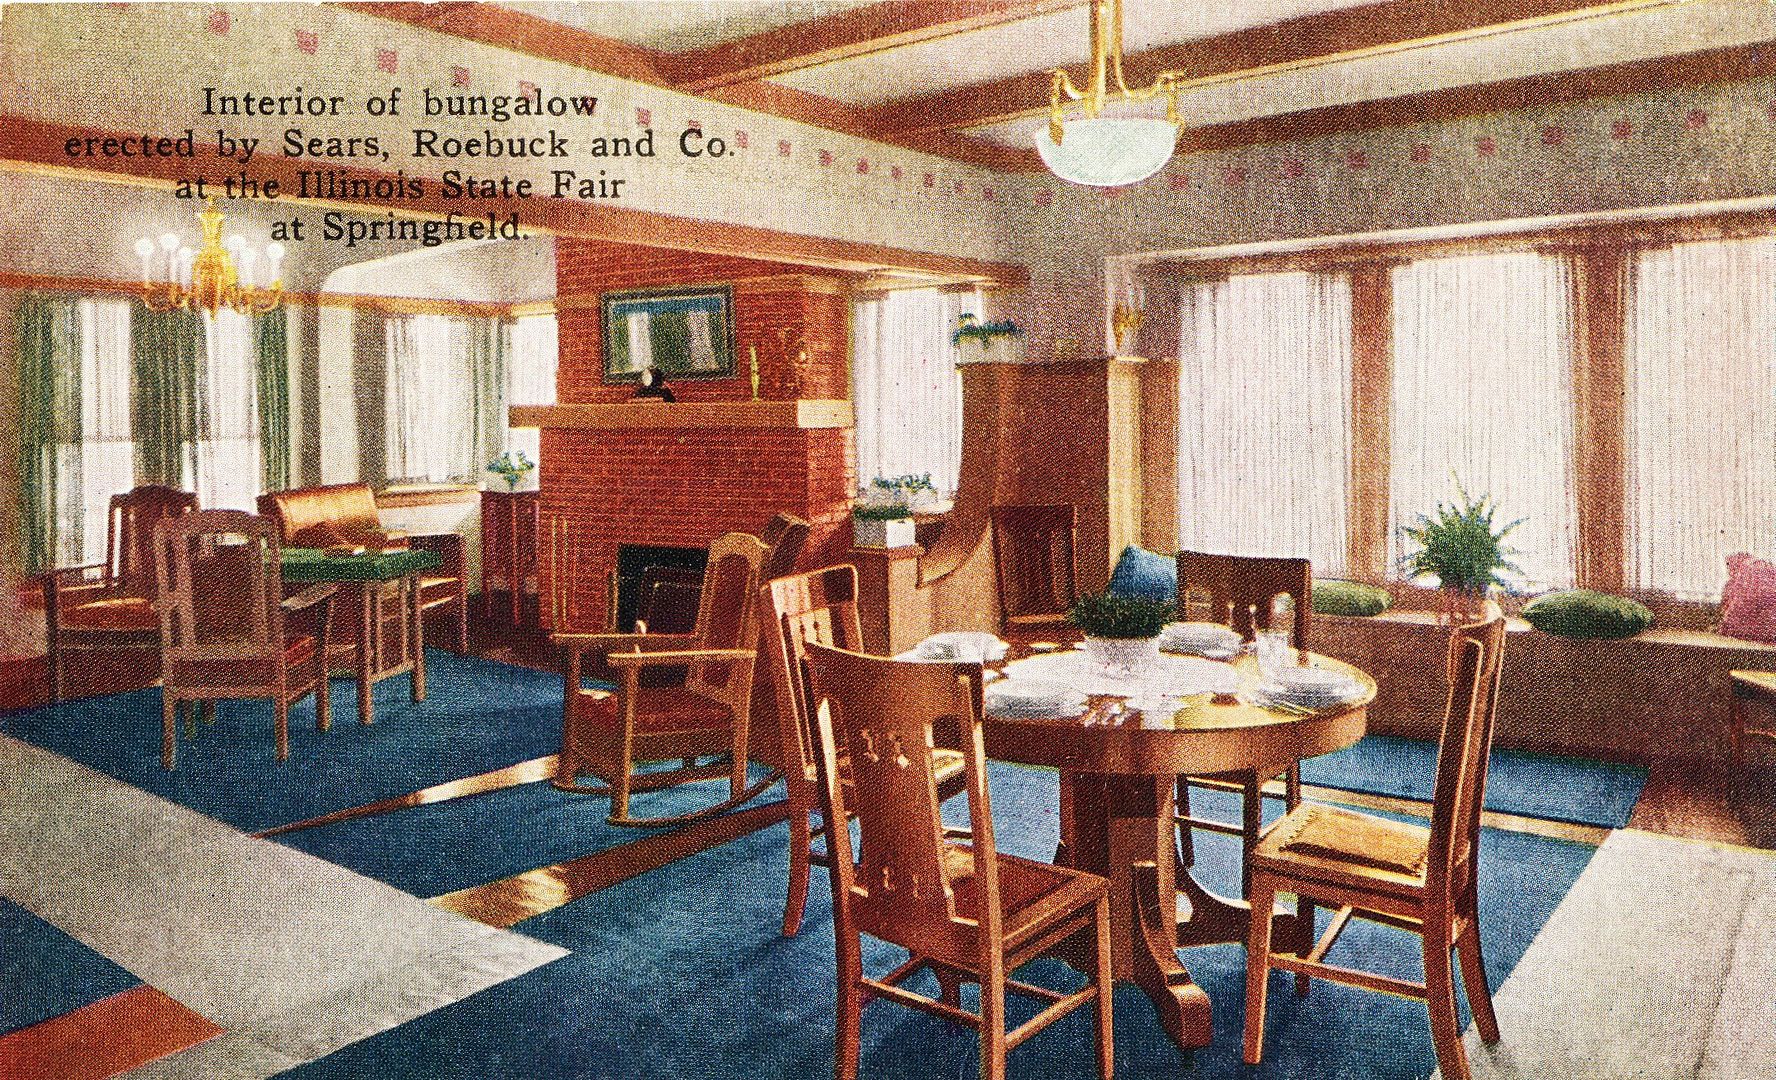 Another postcard shows the fancy interior of the Avondale.